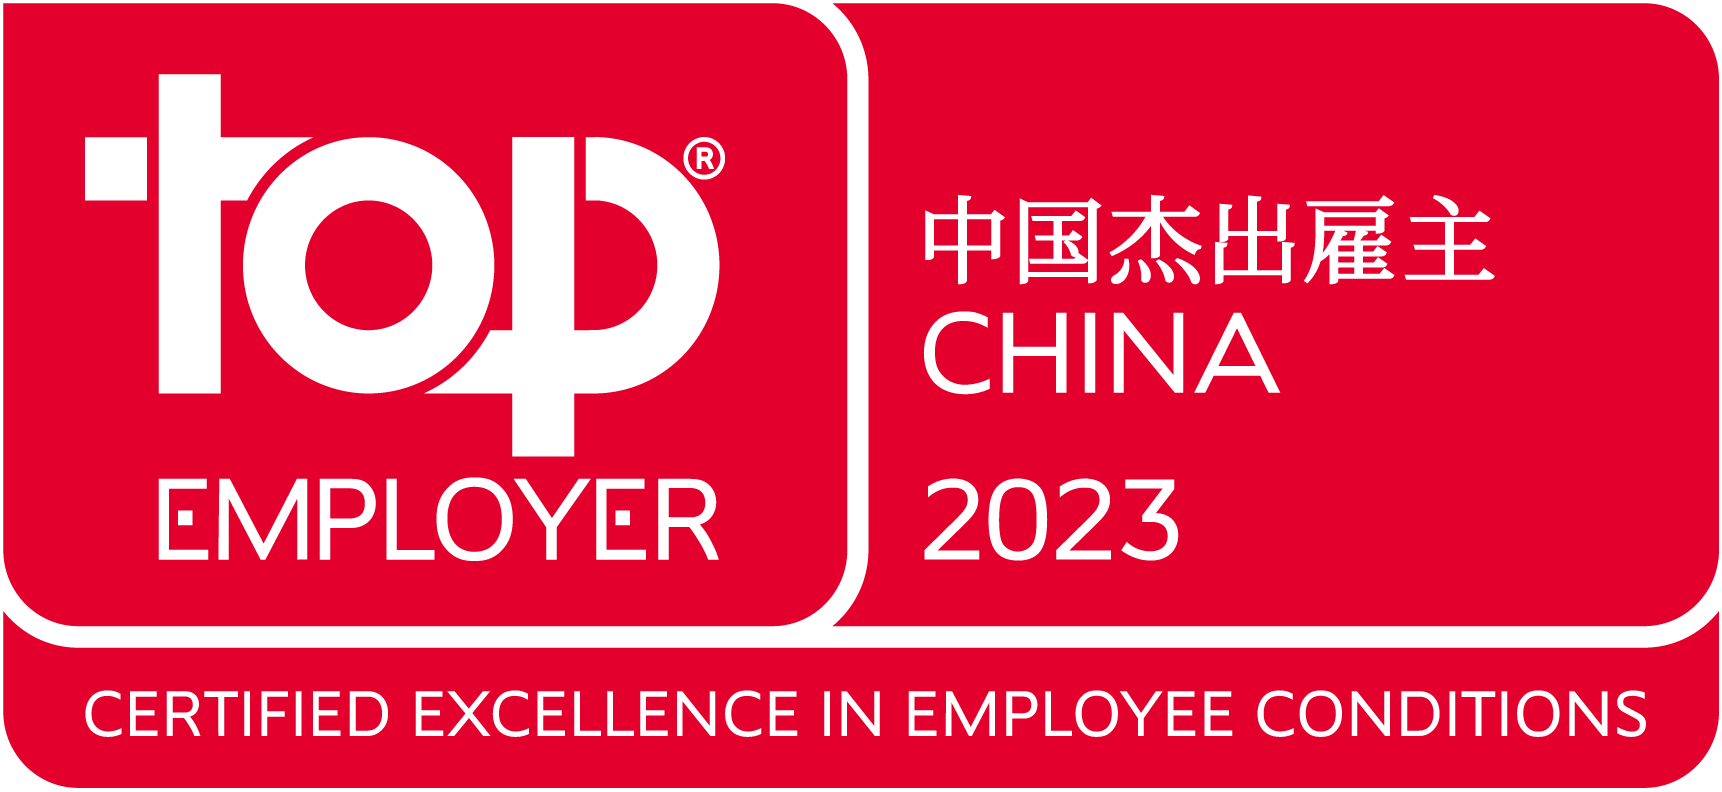 Top_Employer_China_2023.png